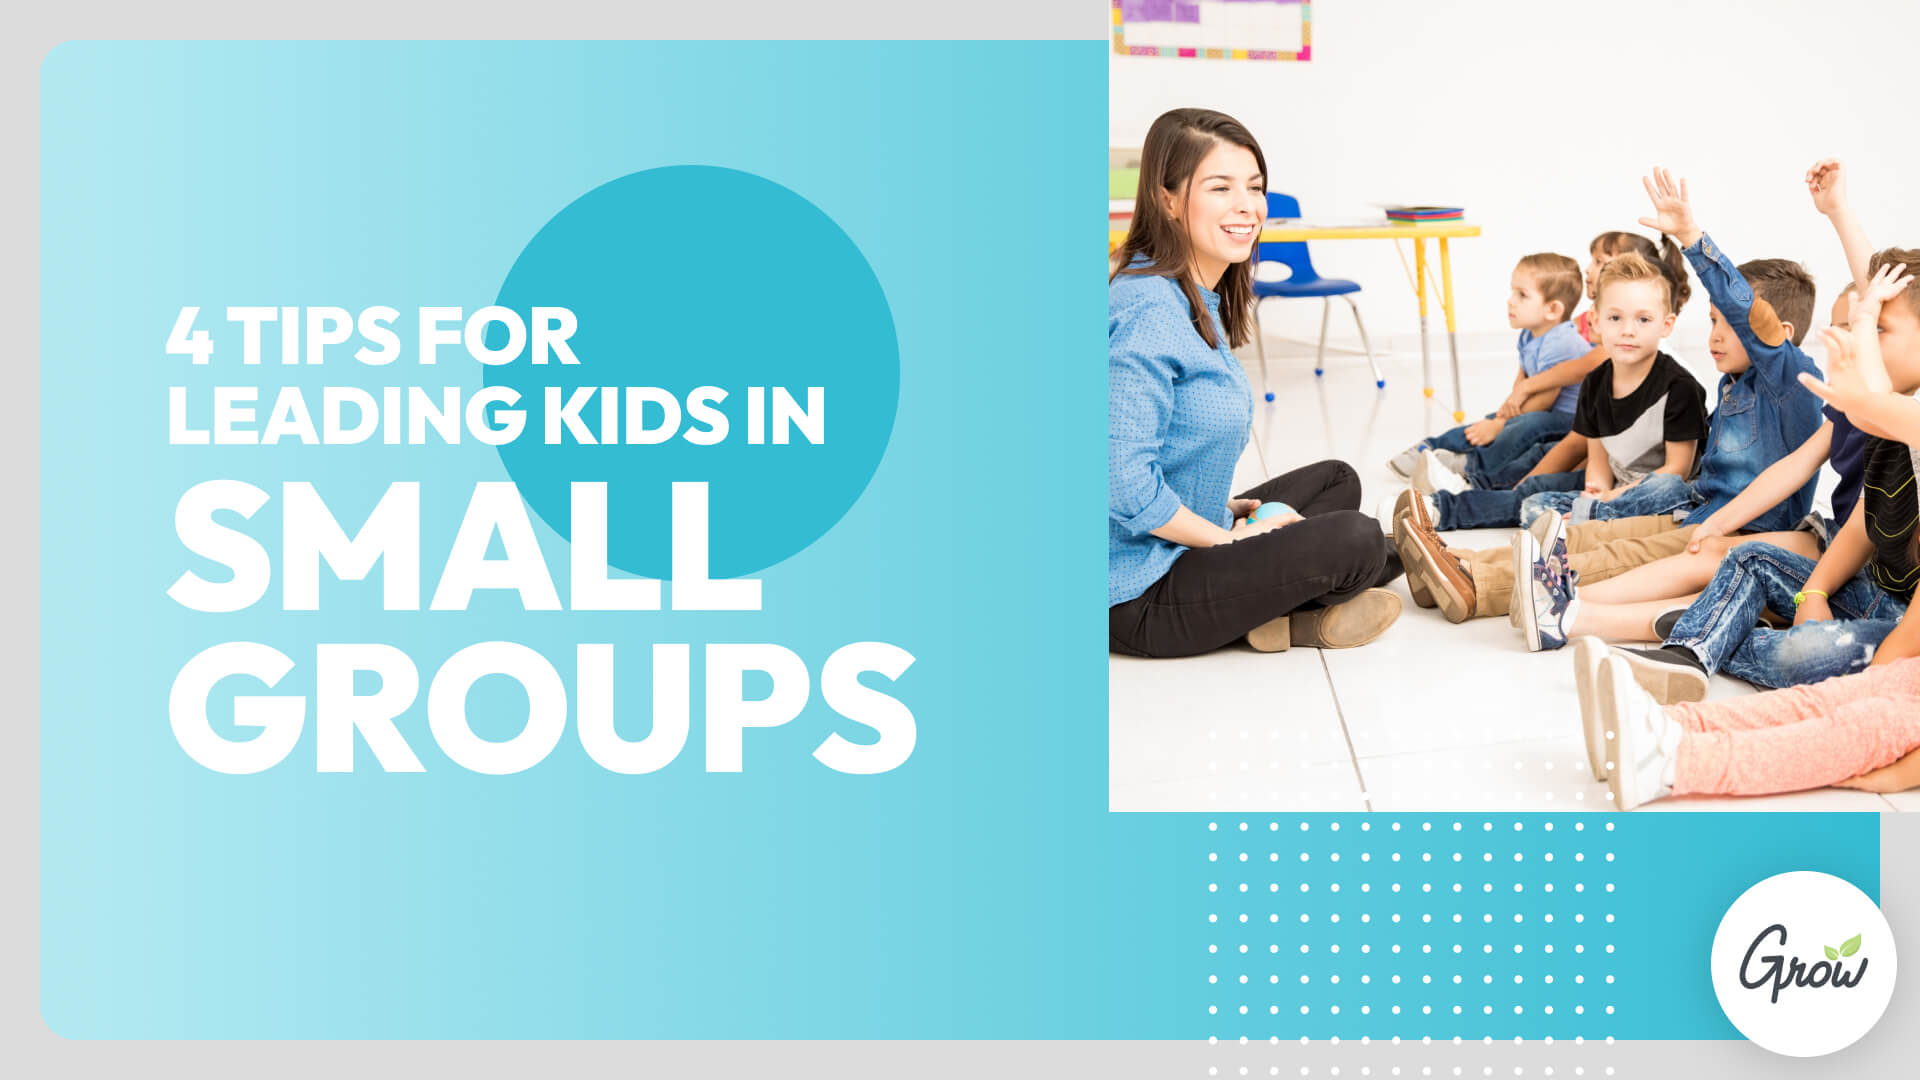 4 Tips for Leading Kids in Small Groups